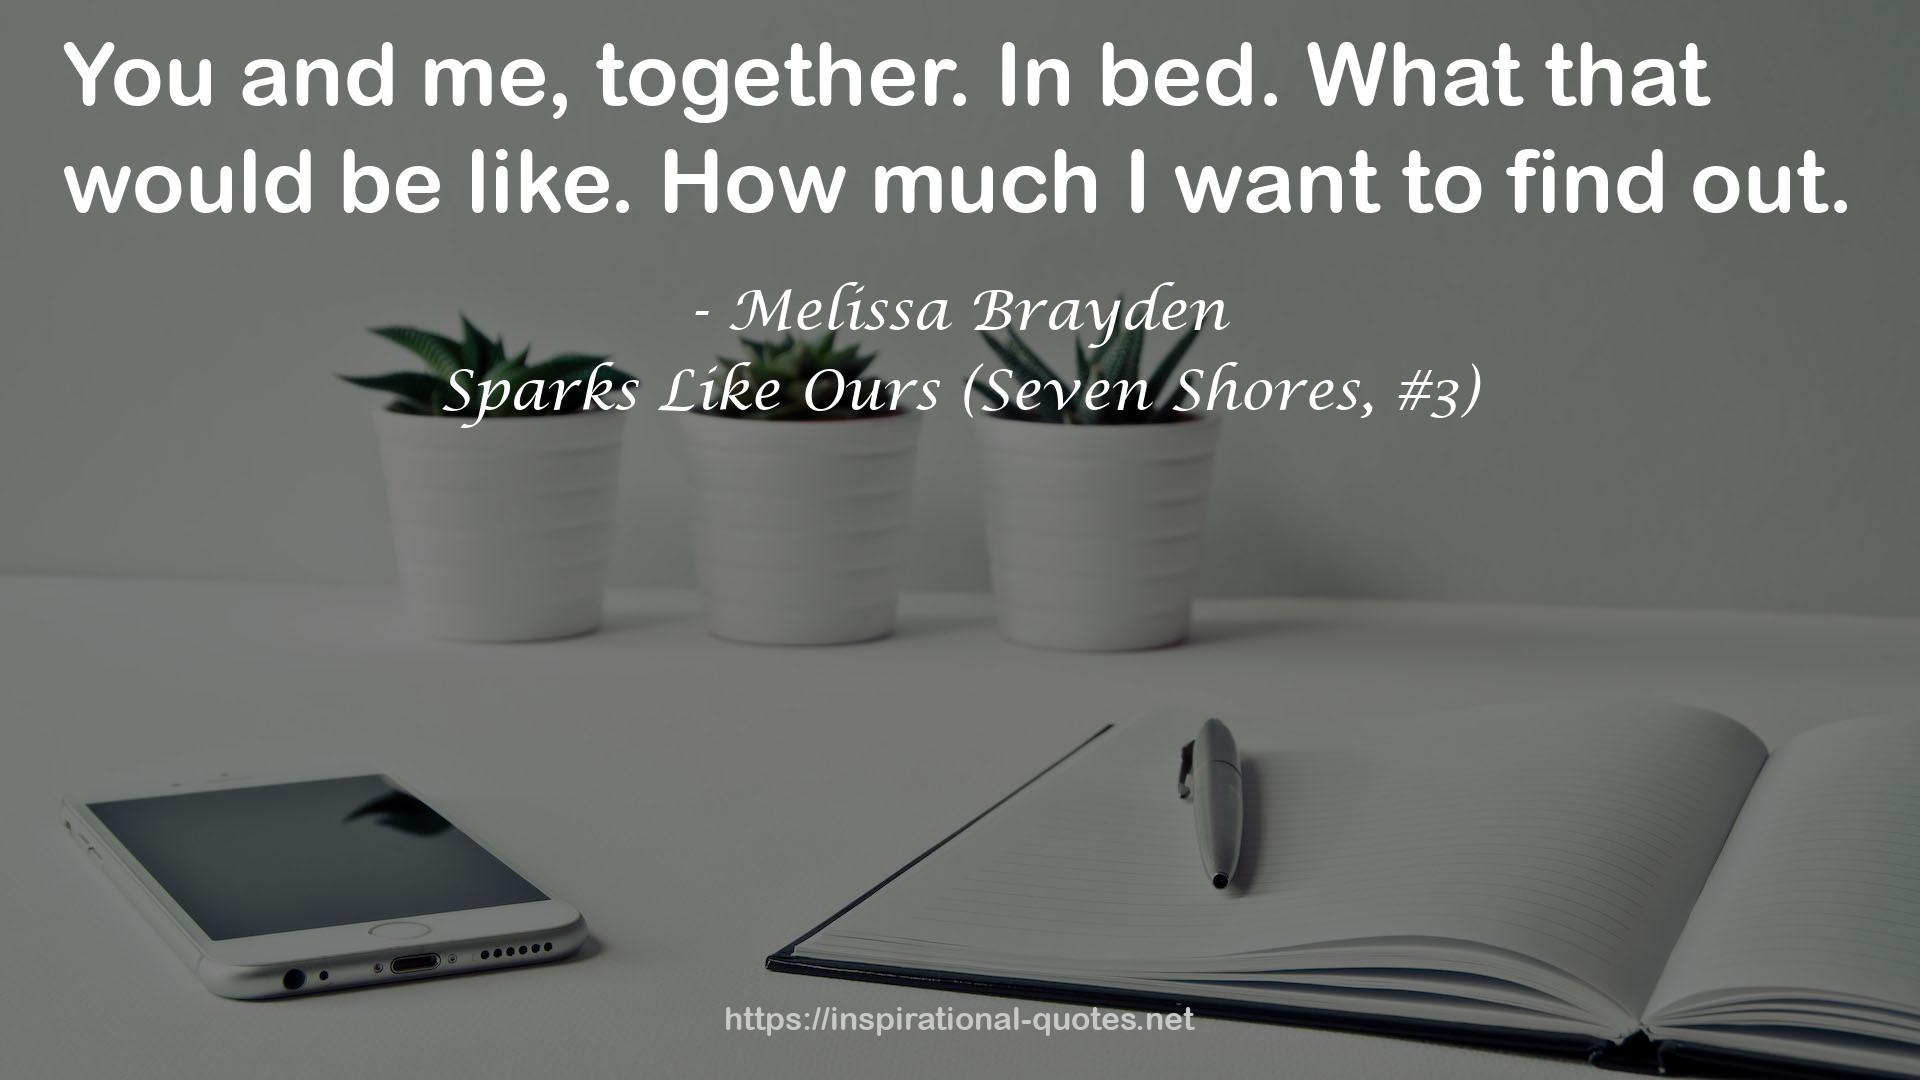 Sparks Like Ours (Seven Shores, #3) QUOTES